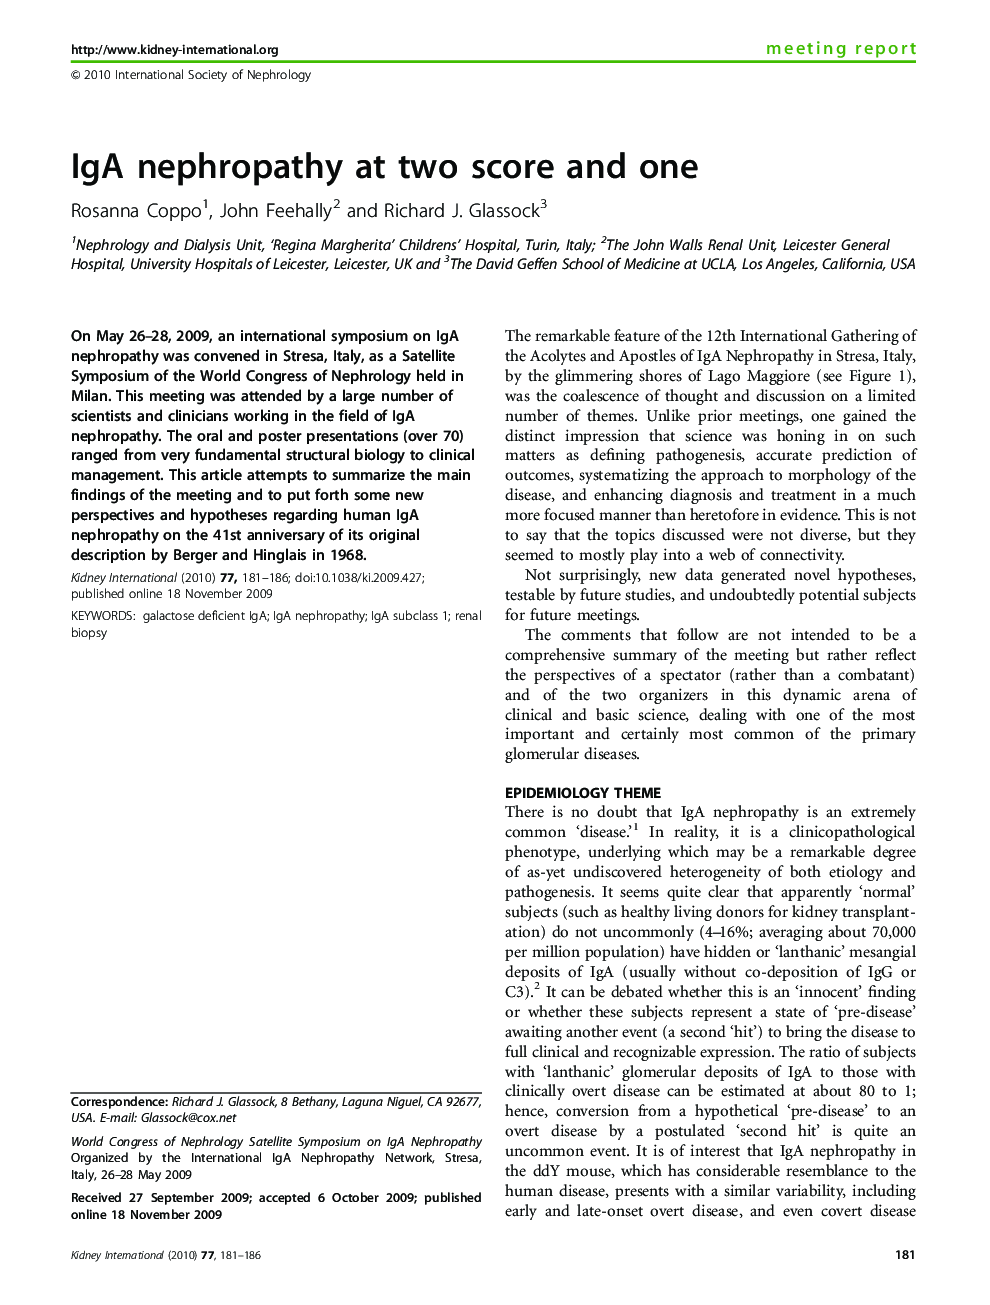 IgA nephropathy at two score and one 